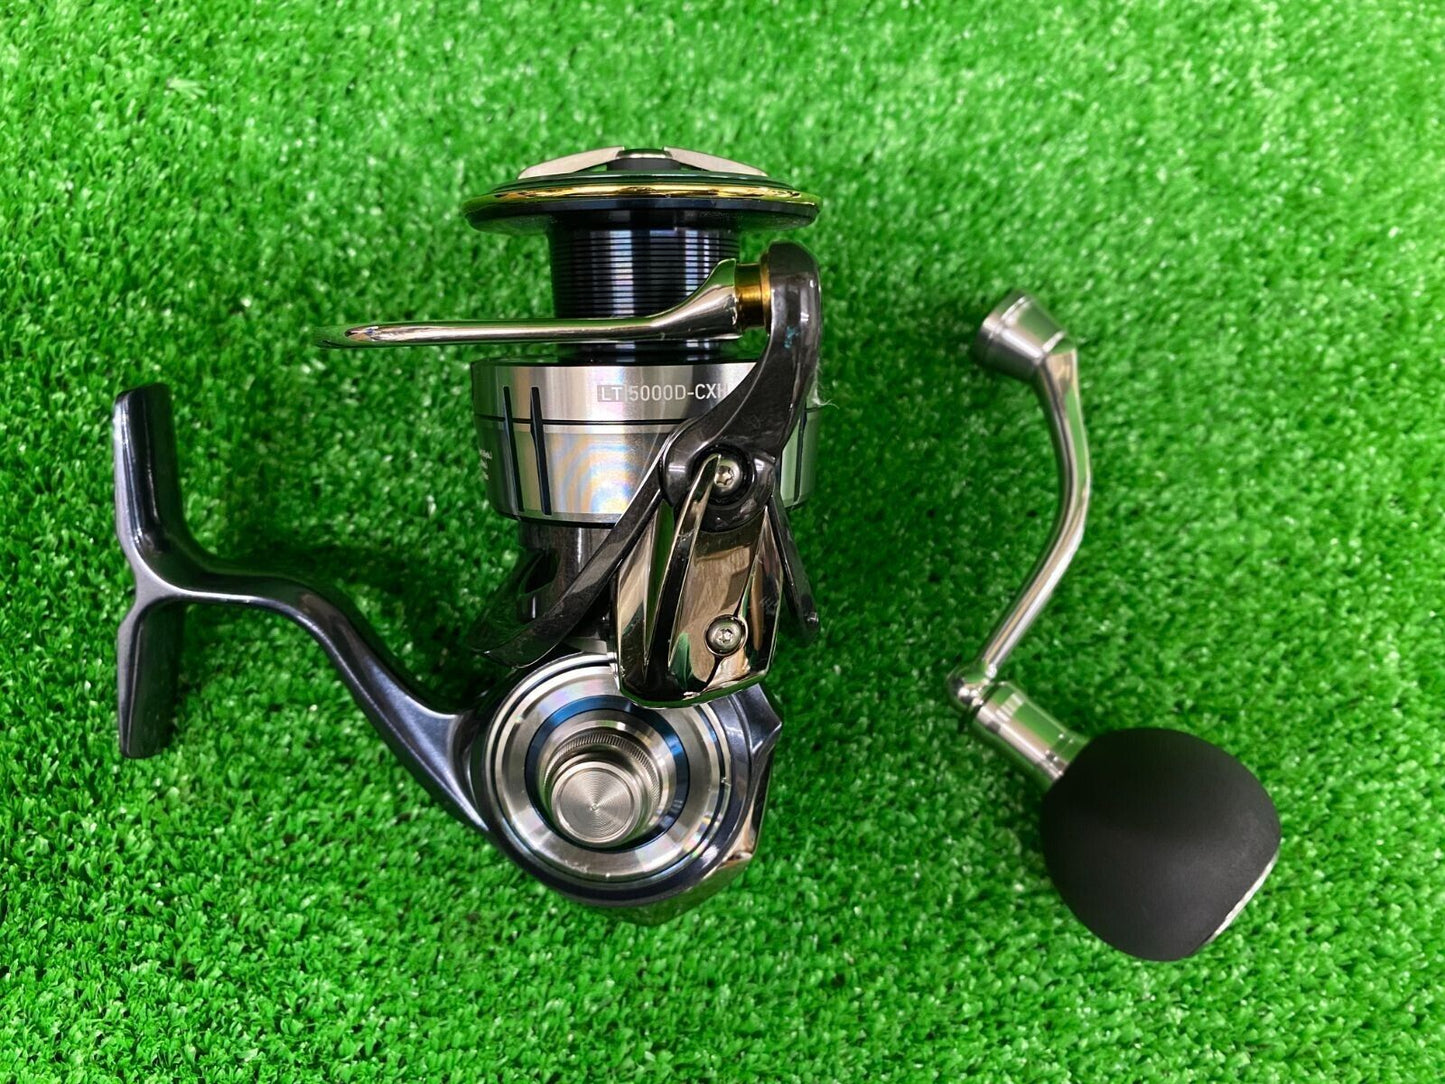 Daiwa 19 CERTATE LT 5000D-CXH Spinning Reel Gear Ratio 6.2:1 F/S from Japan